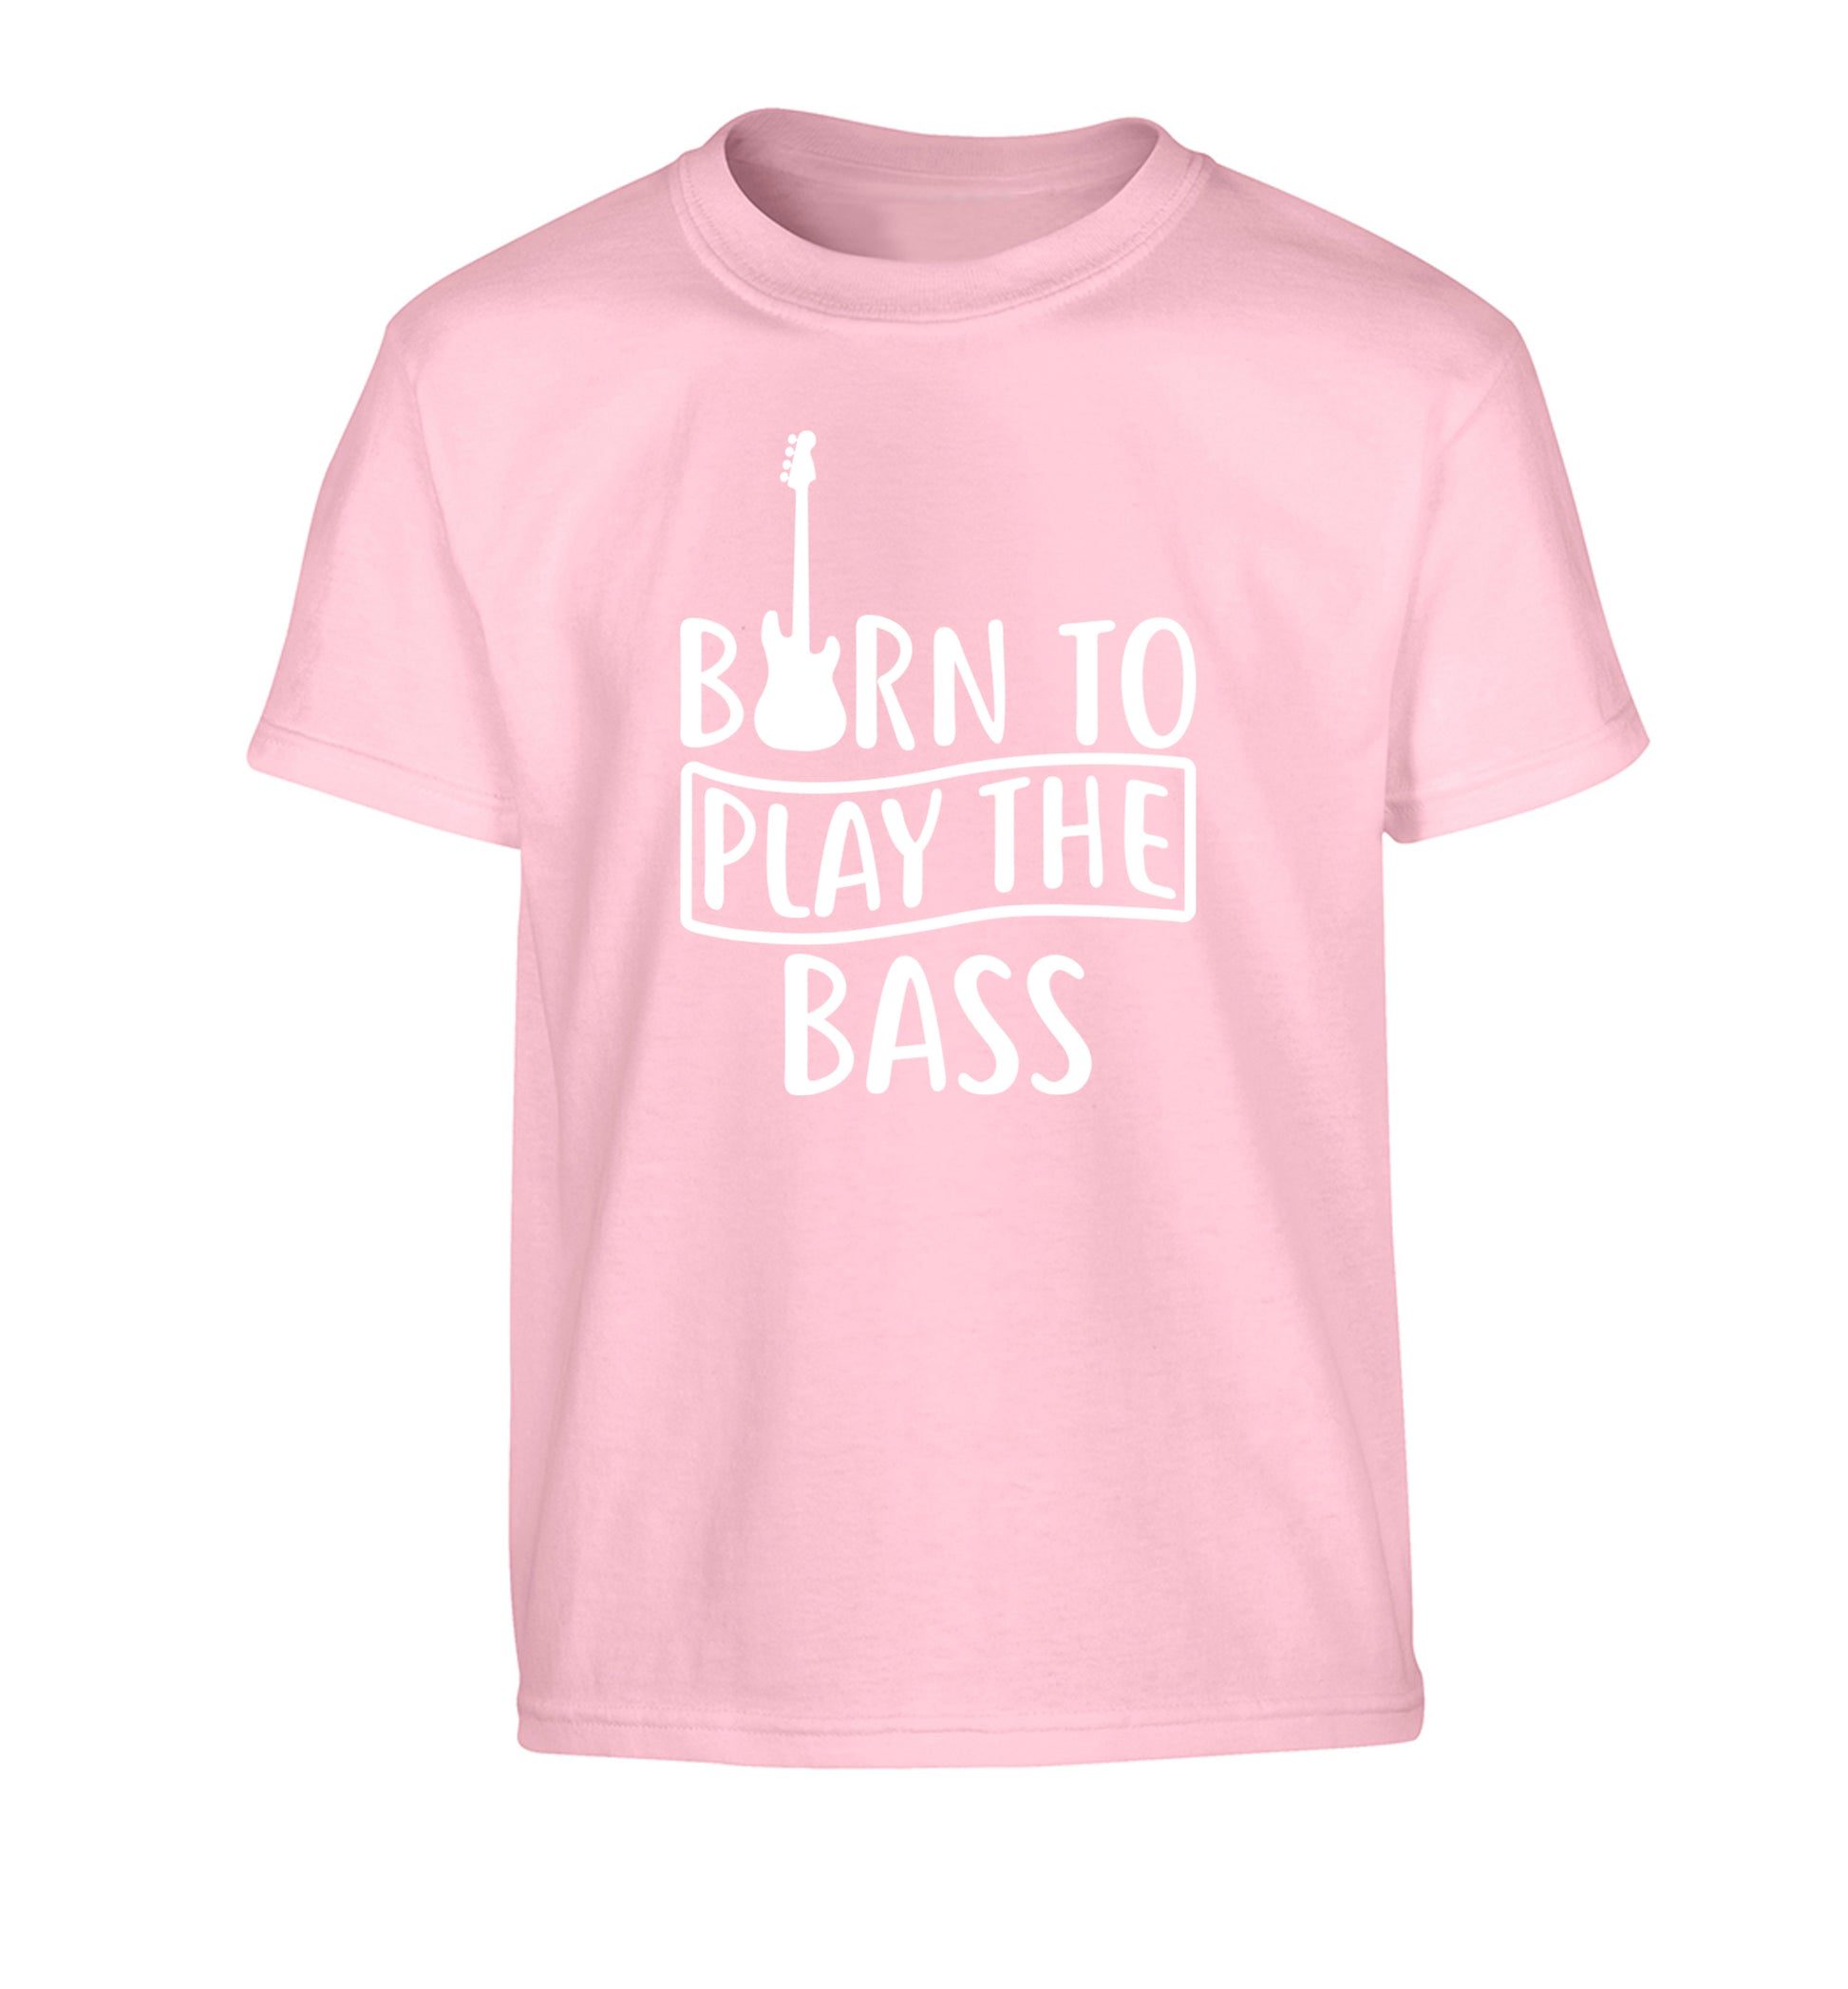 Born to play the bass Children's light pink Tshirt 12-14 Years